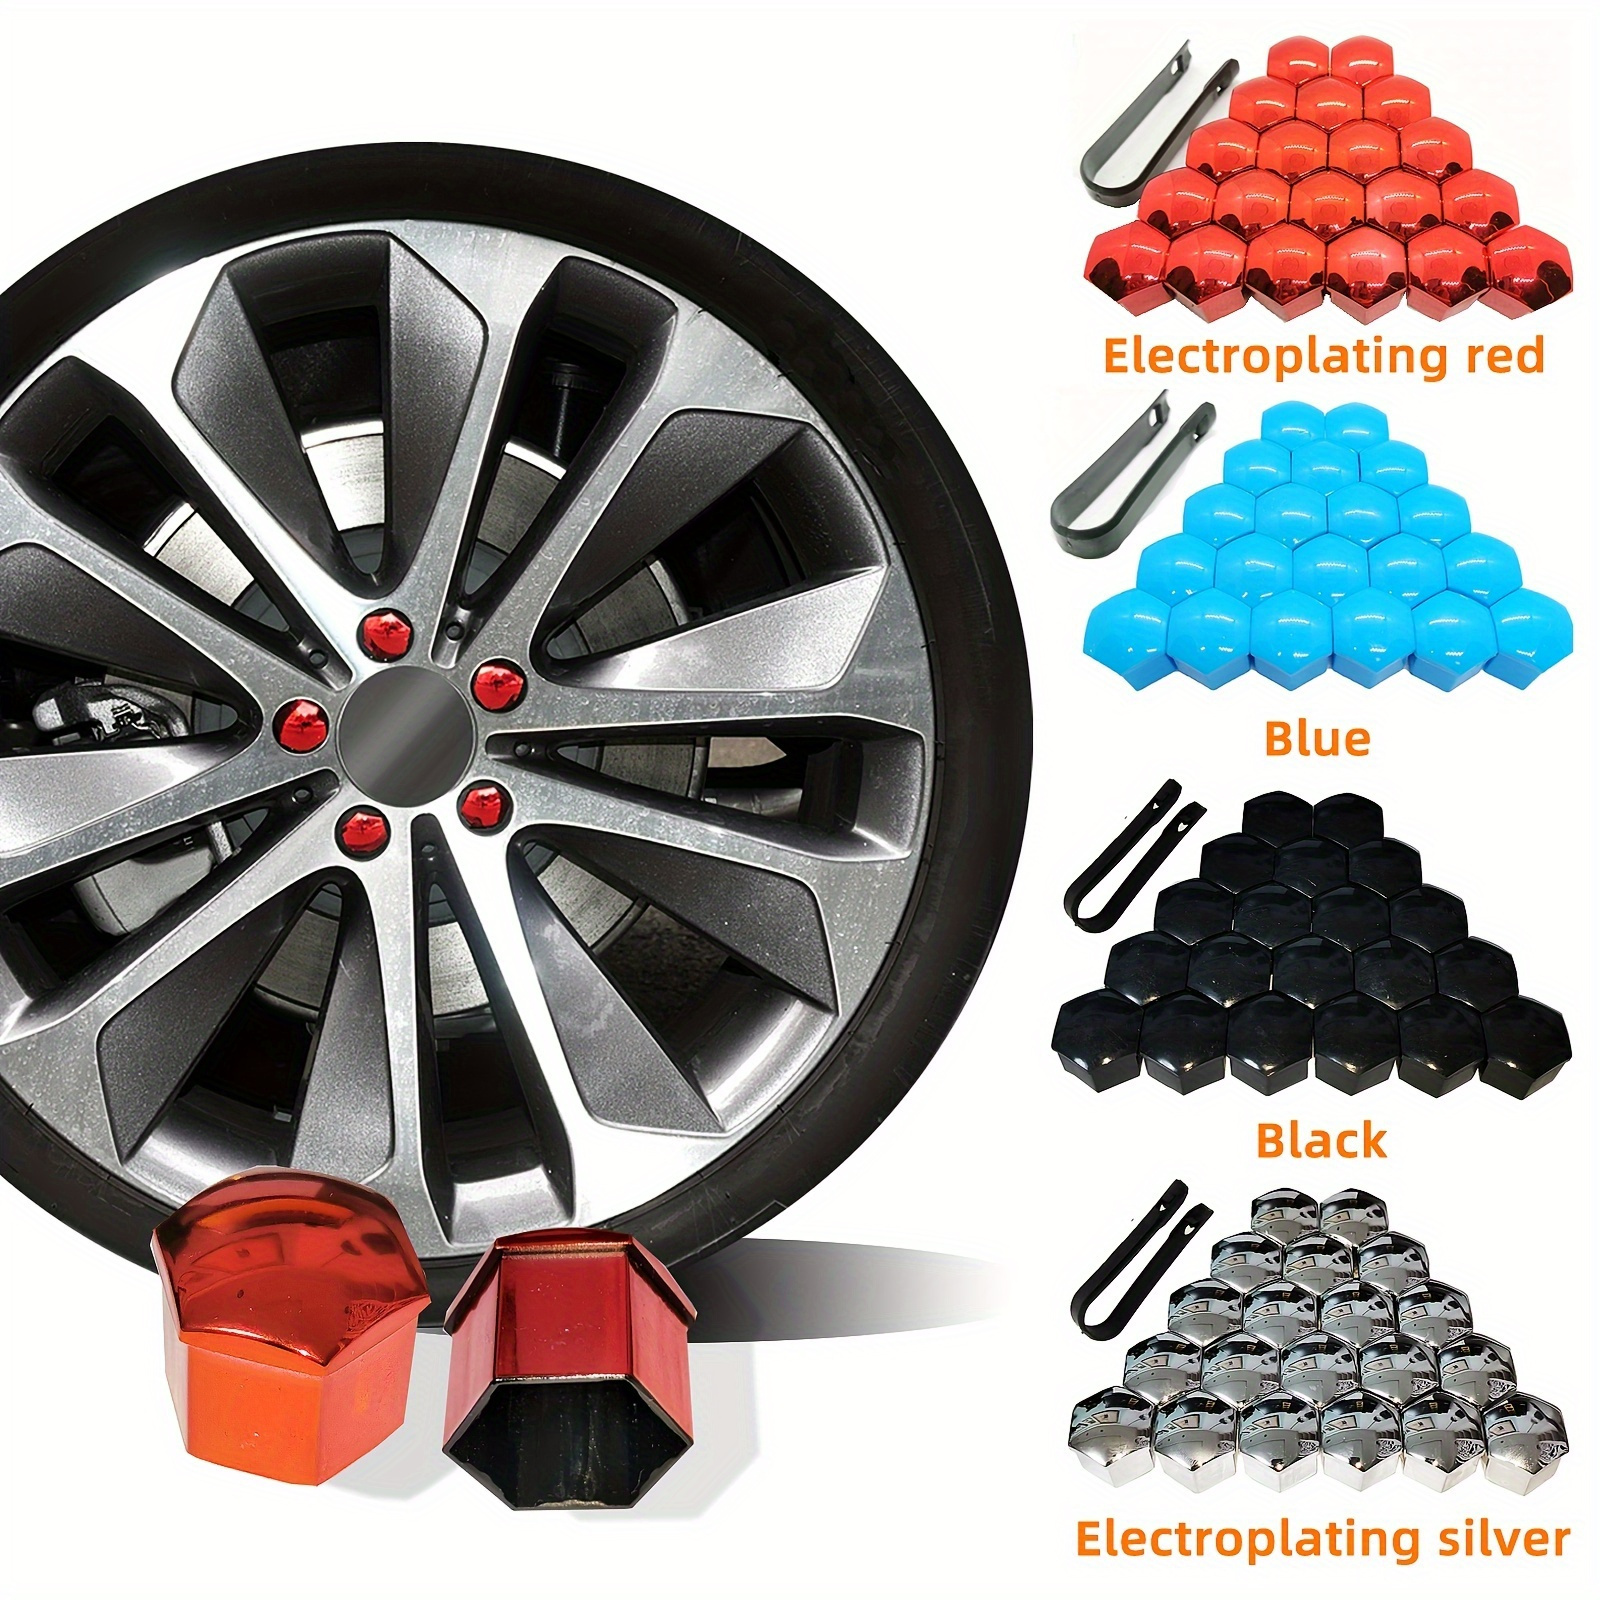 

20pcs Universal Lug Nut Covers For Automotive Wheel Hubs, Tire Cap Modification Accessories, Dust-proof, Rust-proof - Durable And Stylish